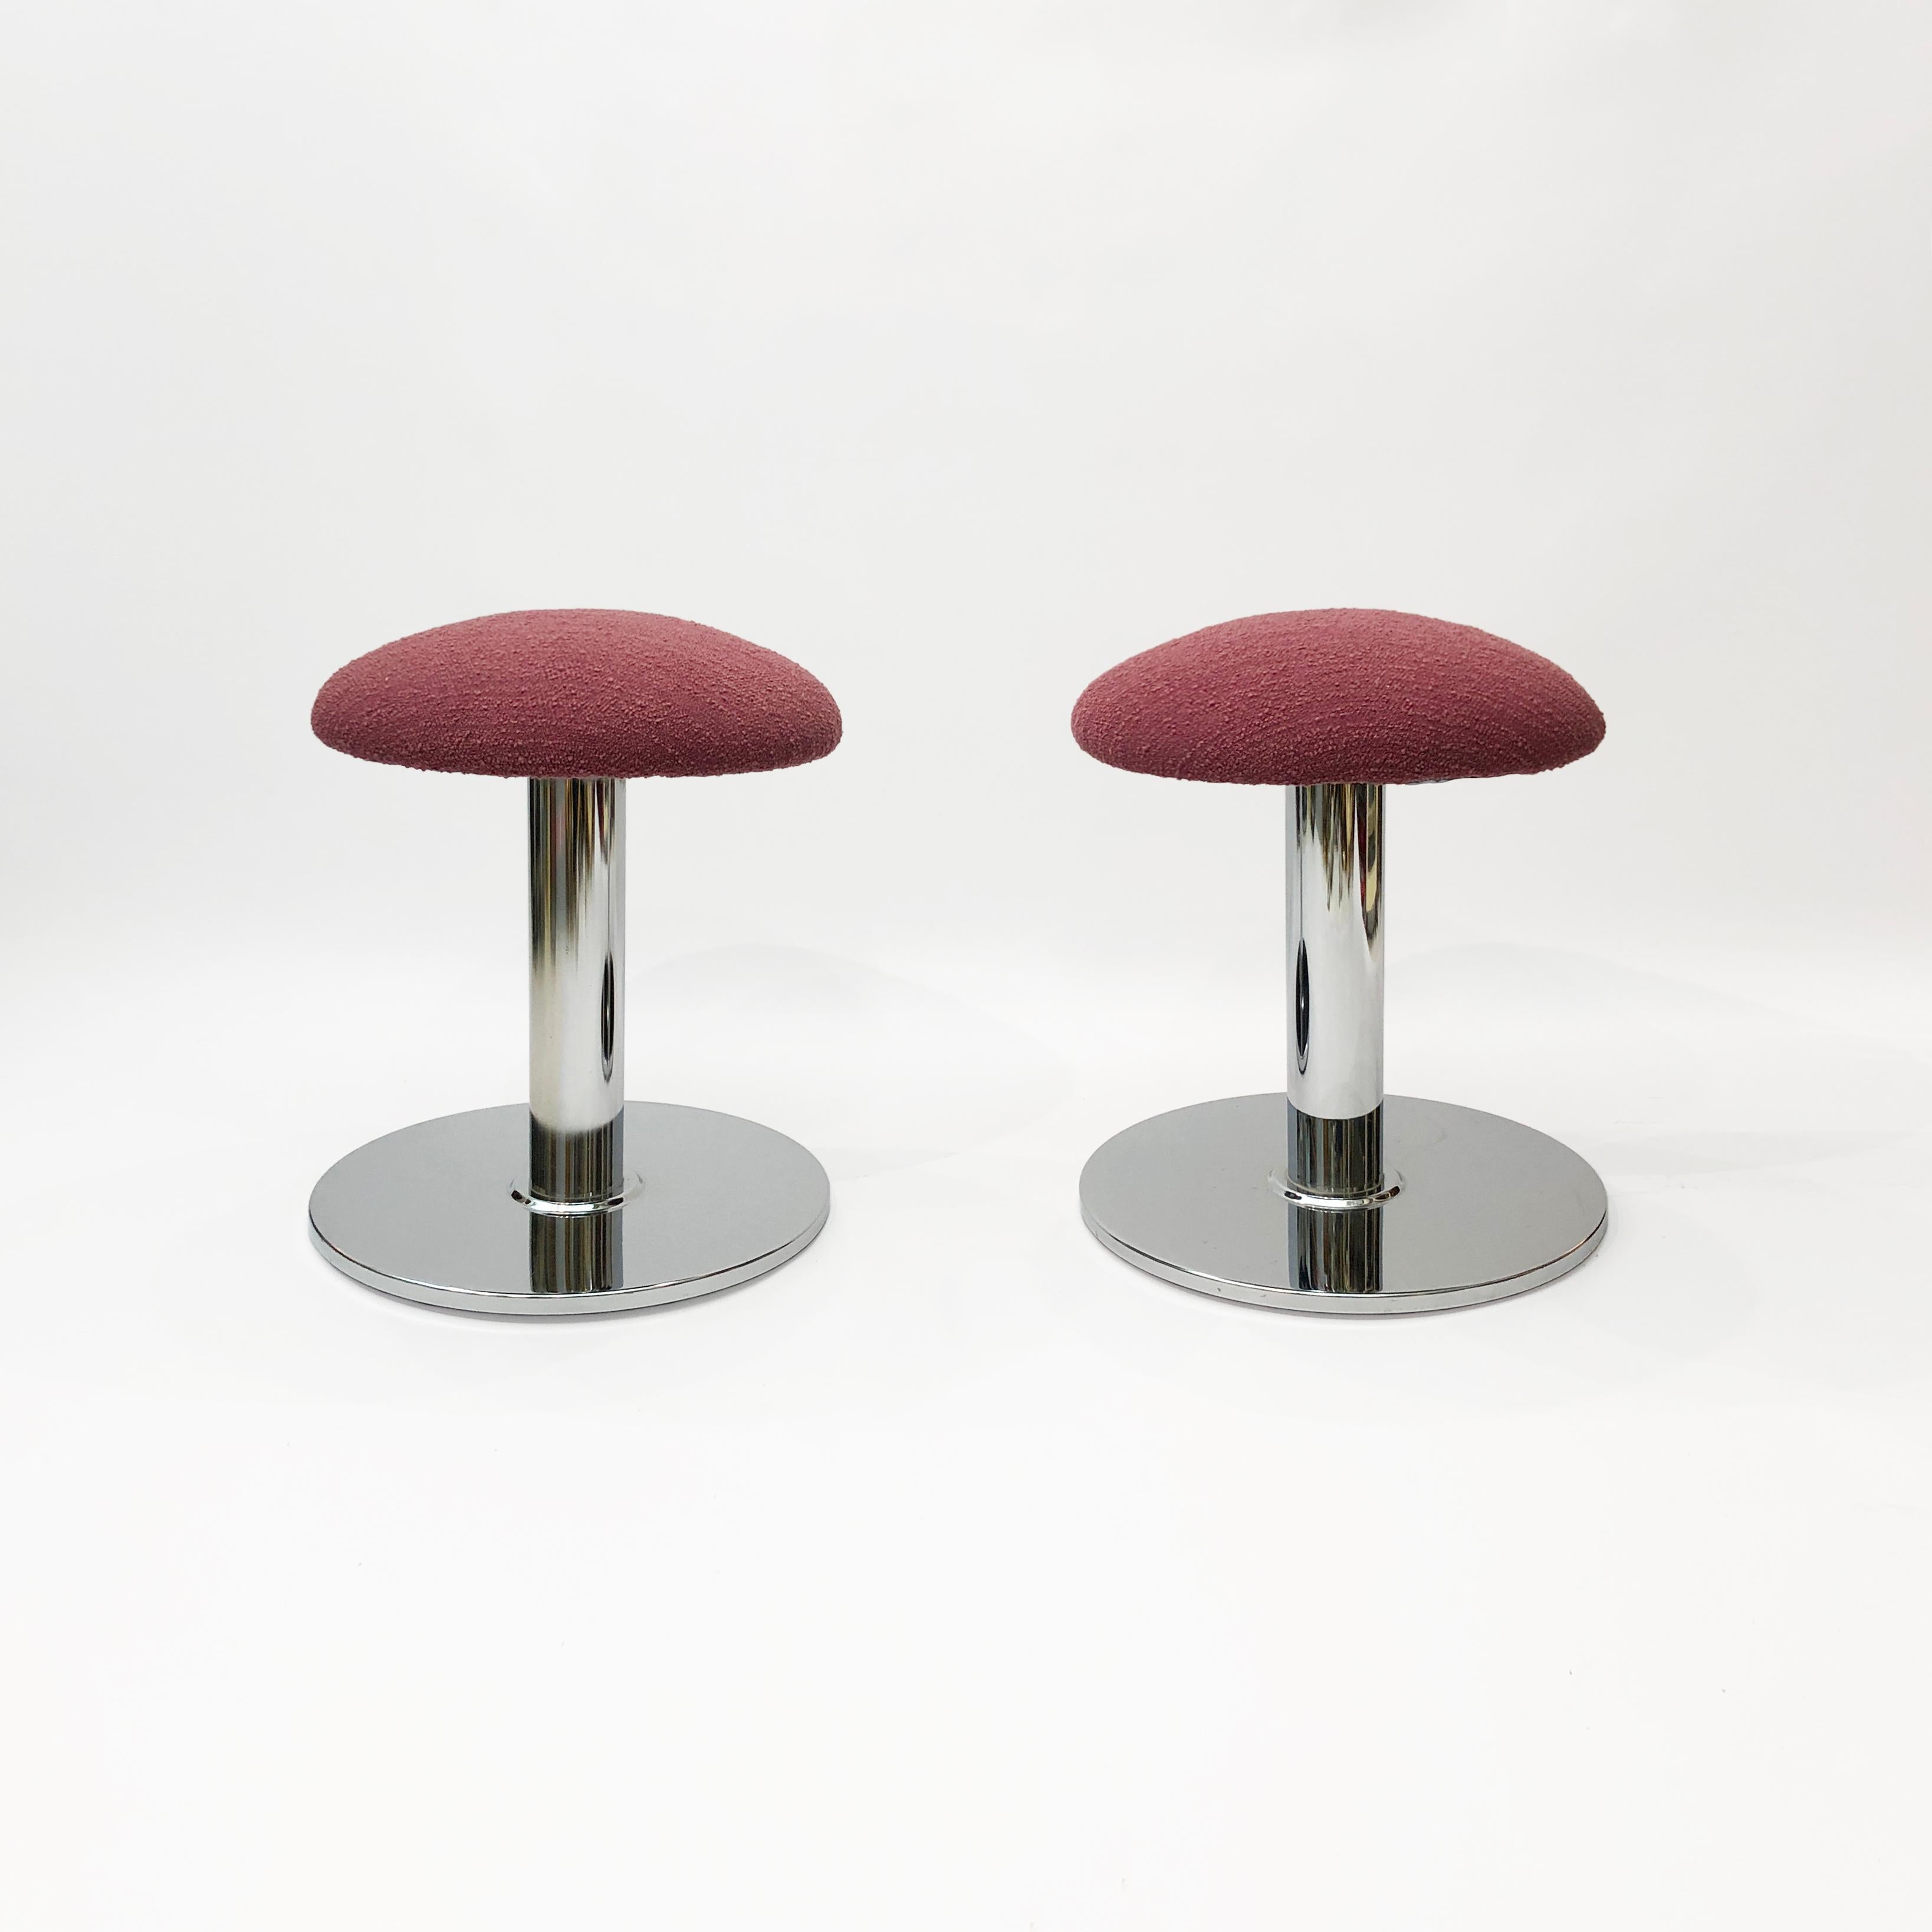 A pair of amazing low-slung stools, in a bold chrome mushroom shape and topped with a bouclé seat. The bouclé is from the prestigious Isle Mill, and is made from organic wool, coloured with a natural dye a fetching aubergine / maroon colour. The